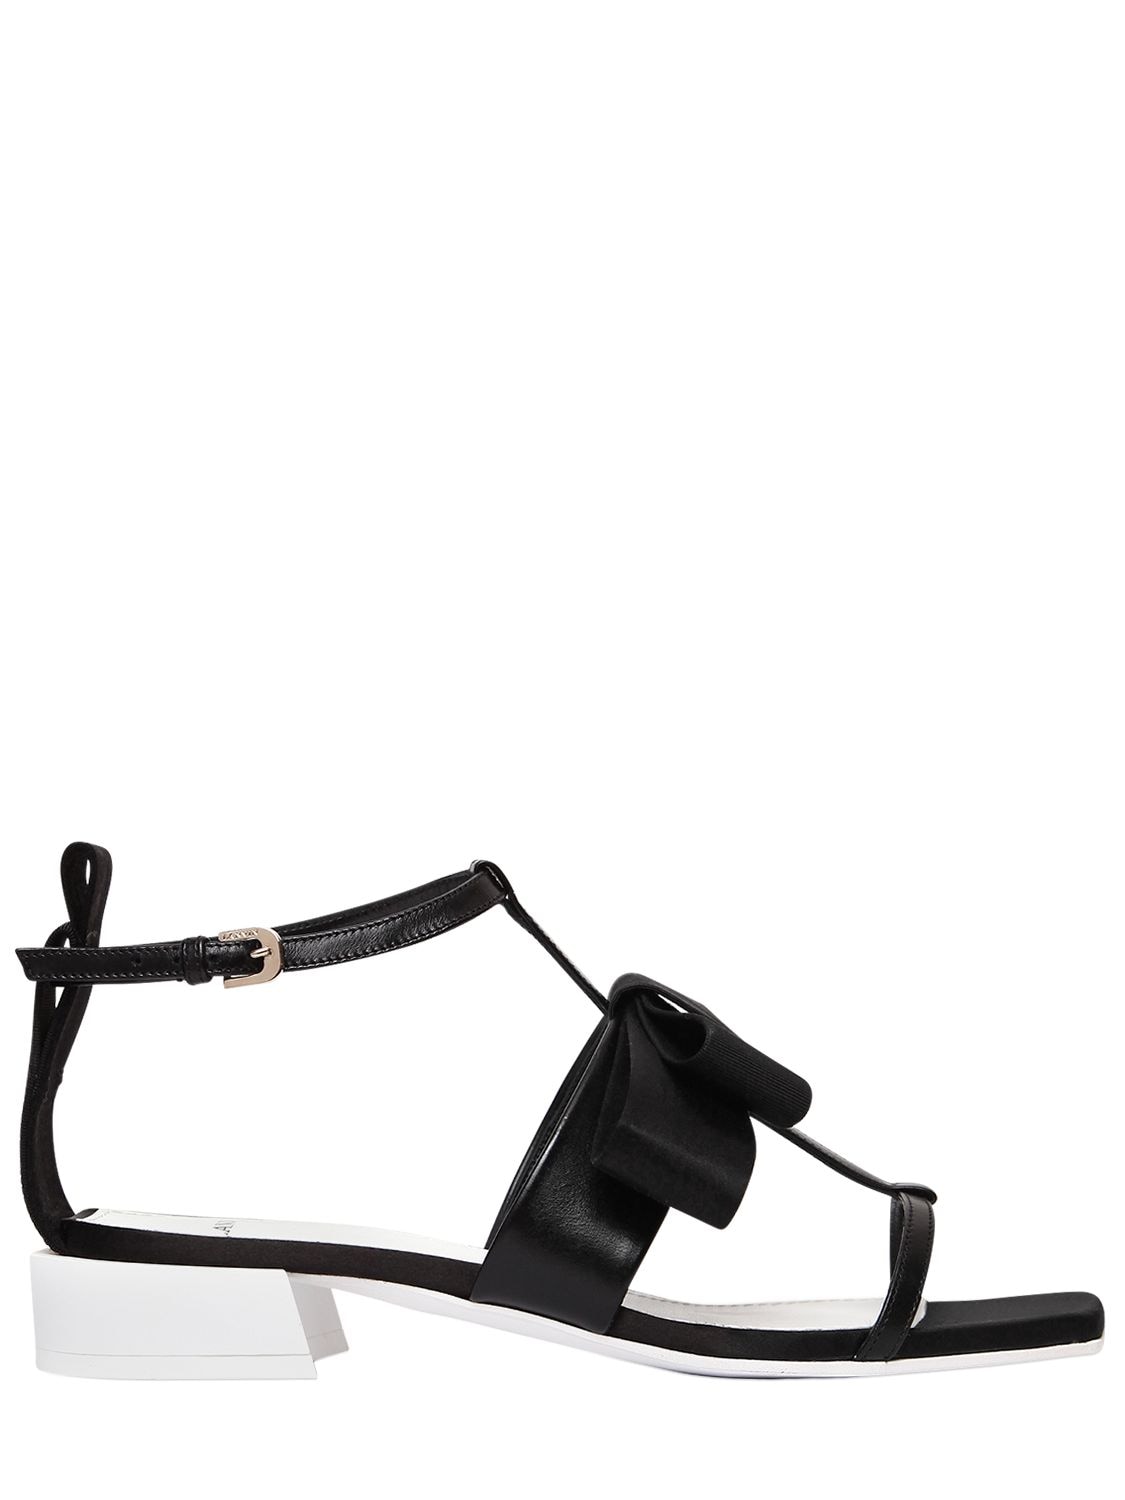 Lanvin 30mm Satin Bow & Leather Sandals In Black